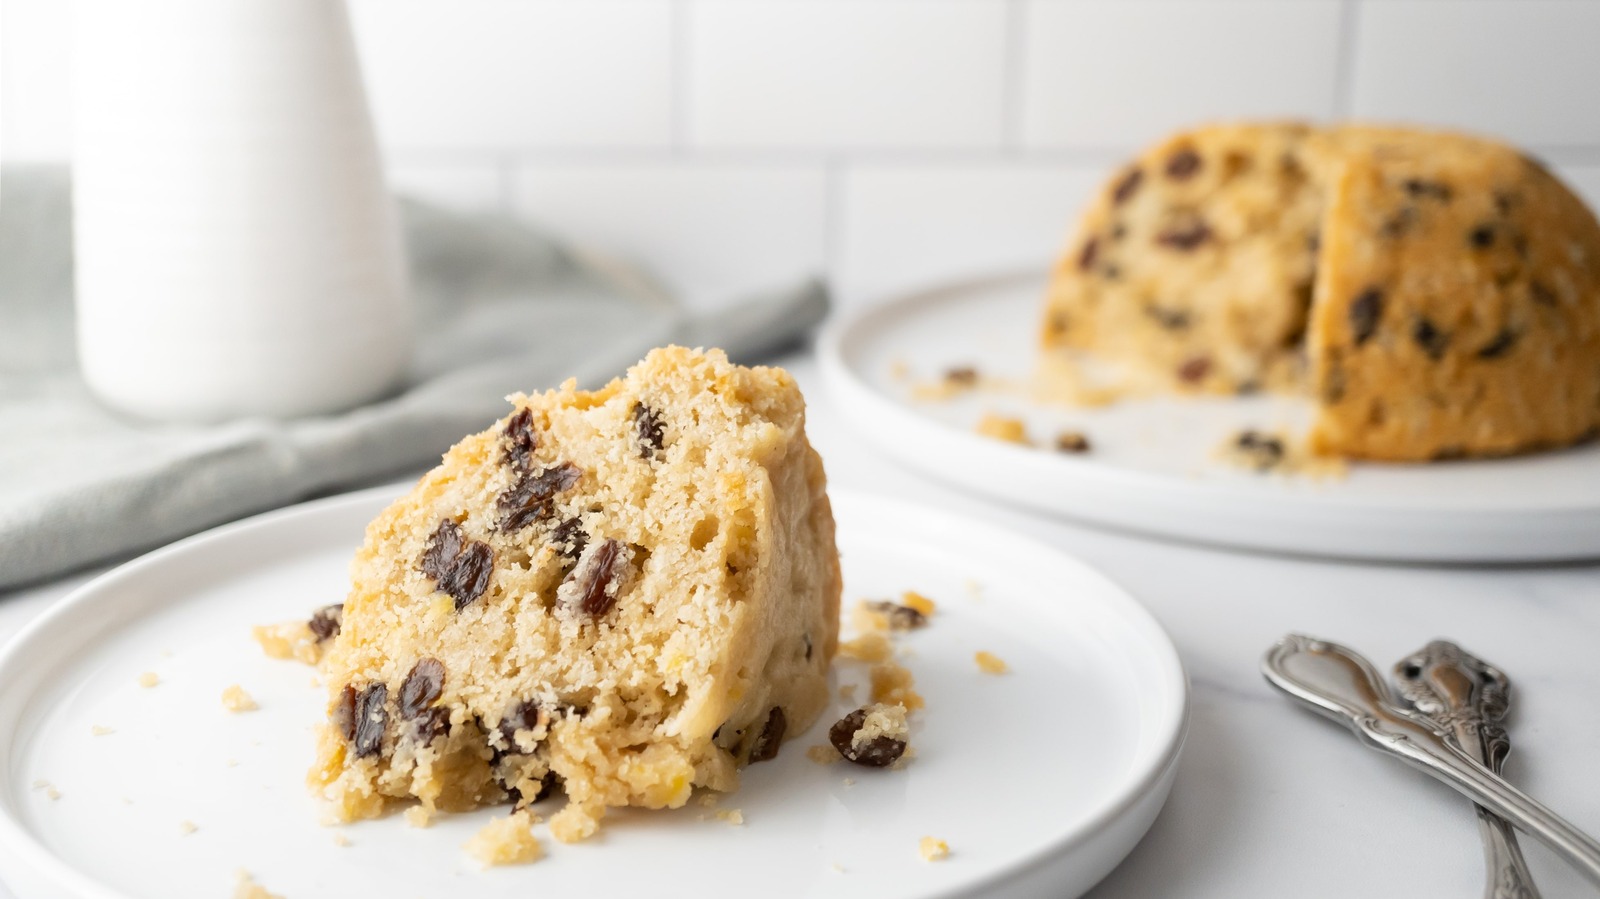 TRADITIONAL SPOTTED DICK (ENGLISH STEAMED PUDDING) RECIPE (WITH CBD)